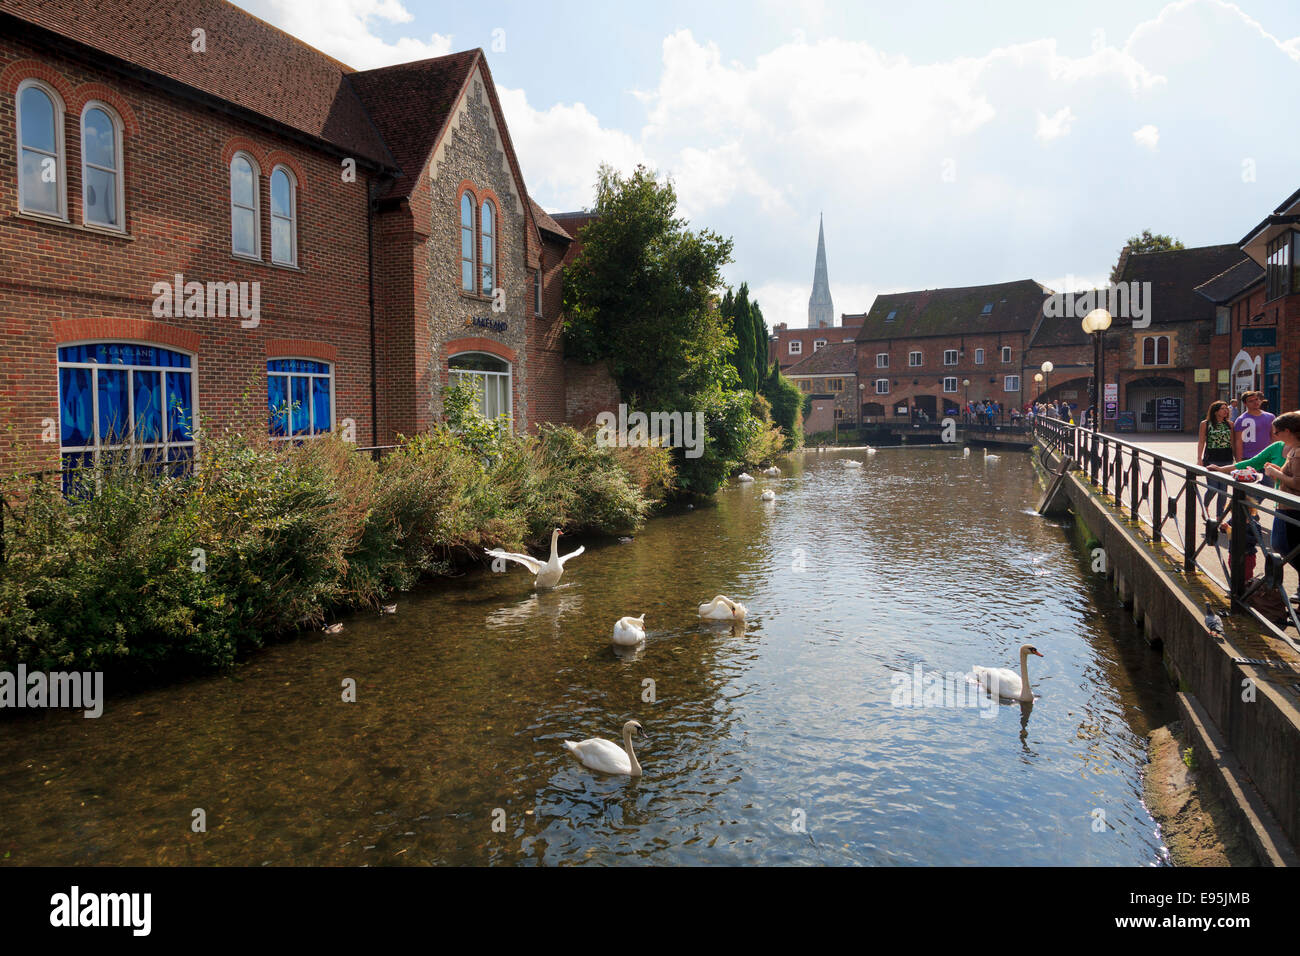 Swans on the River Avon running through The Maltings shopping Centre in Salisbury Stock Photo